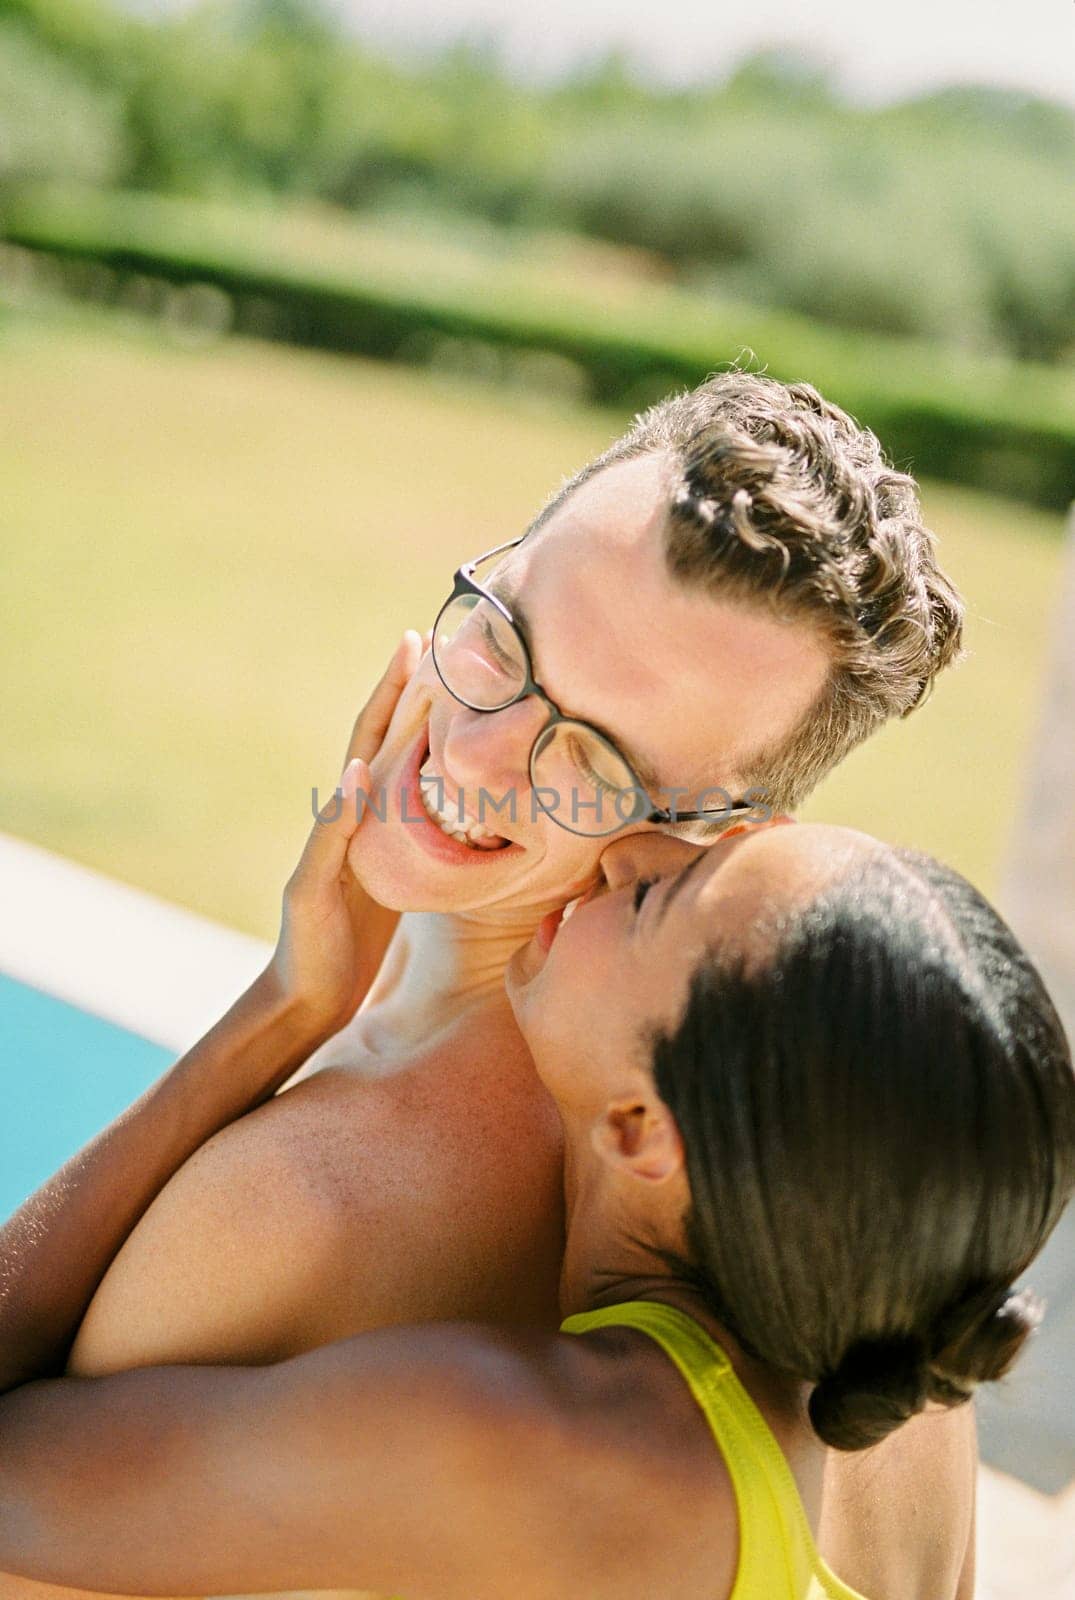 Smiling woman kisses man on the cheek while hugging his face from behind. Back view. High quality photo